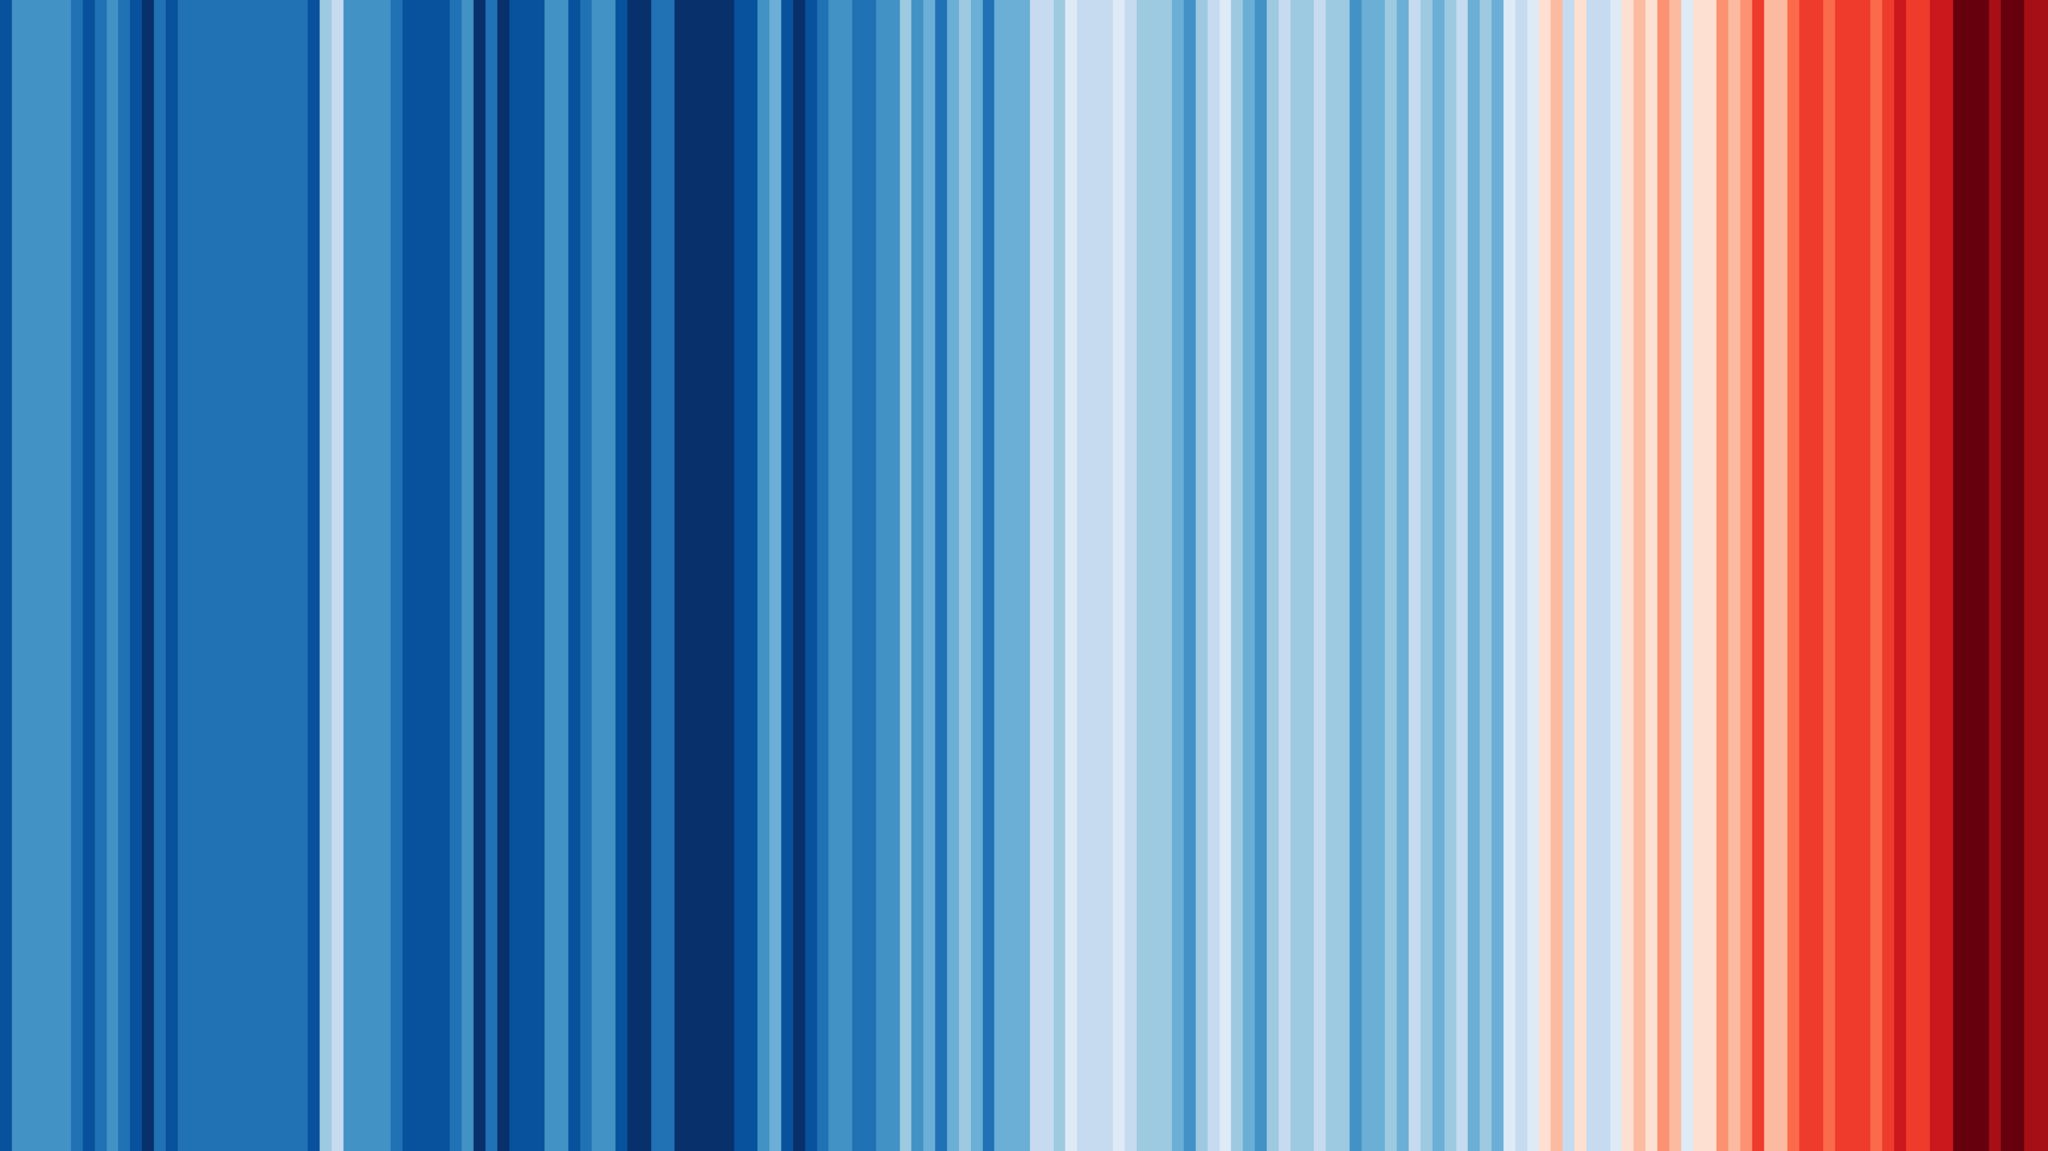 Coloured stripes showing average global temperature